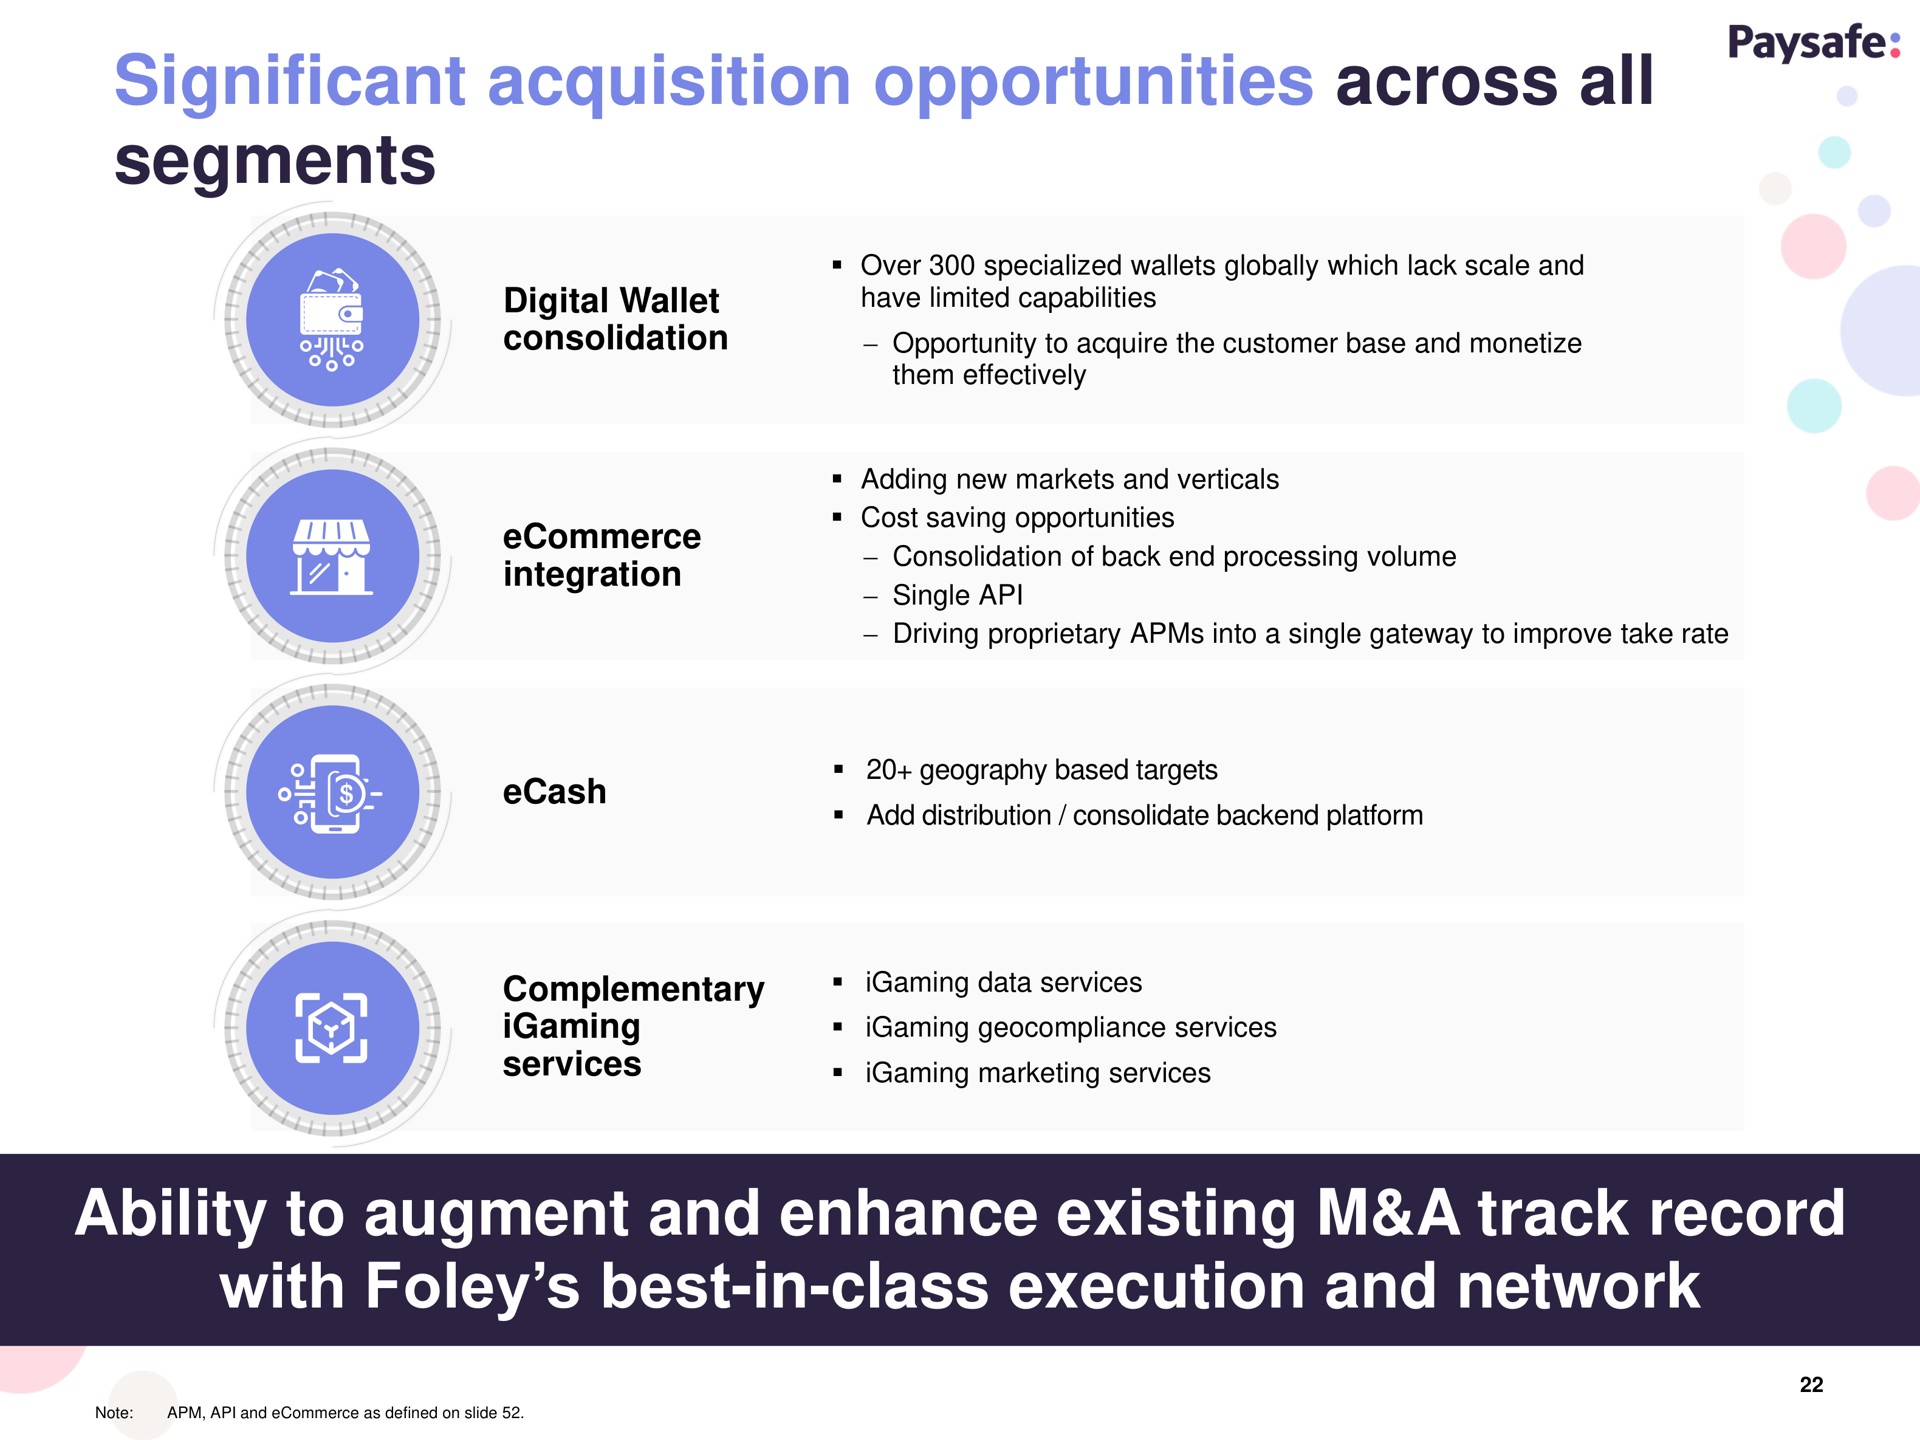 significant acquisition opportunities across all segments ability to augment and enhance existing a track record with best in class execution and network | Paysafe